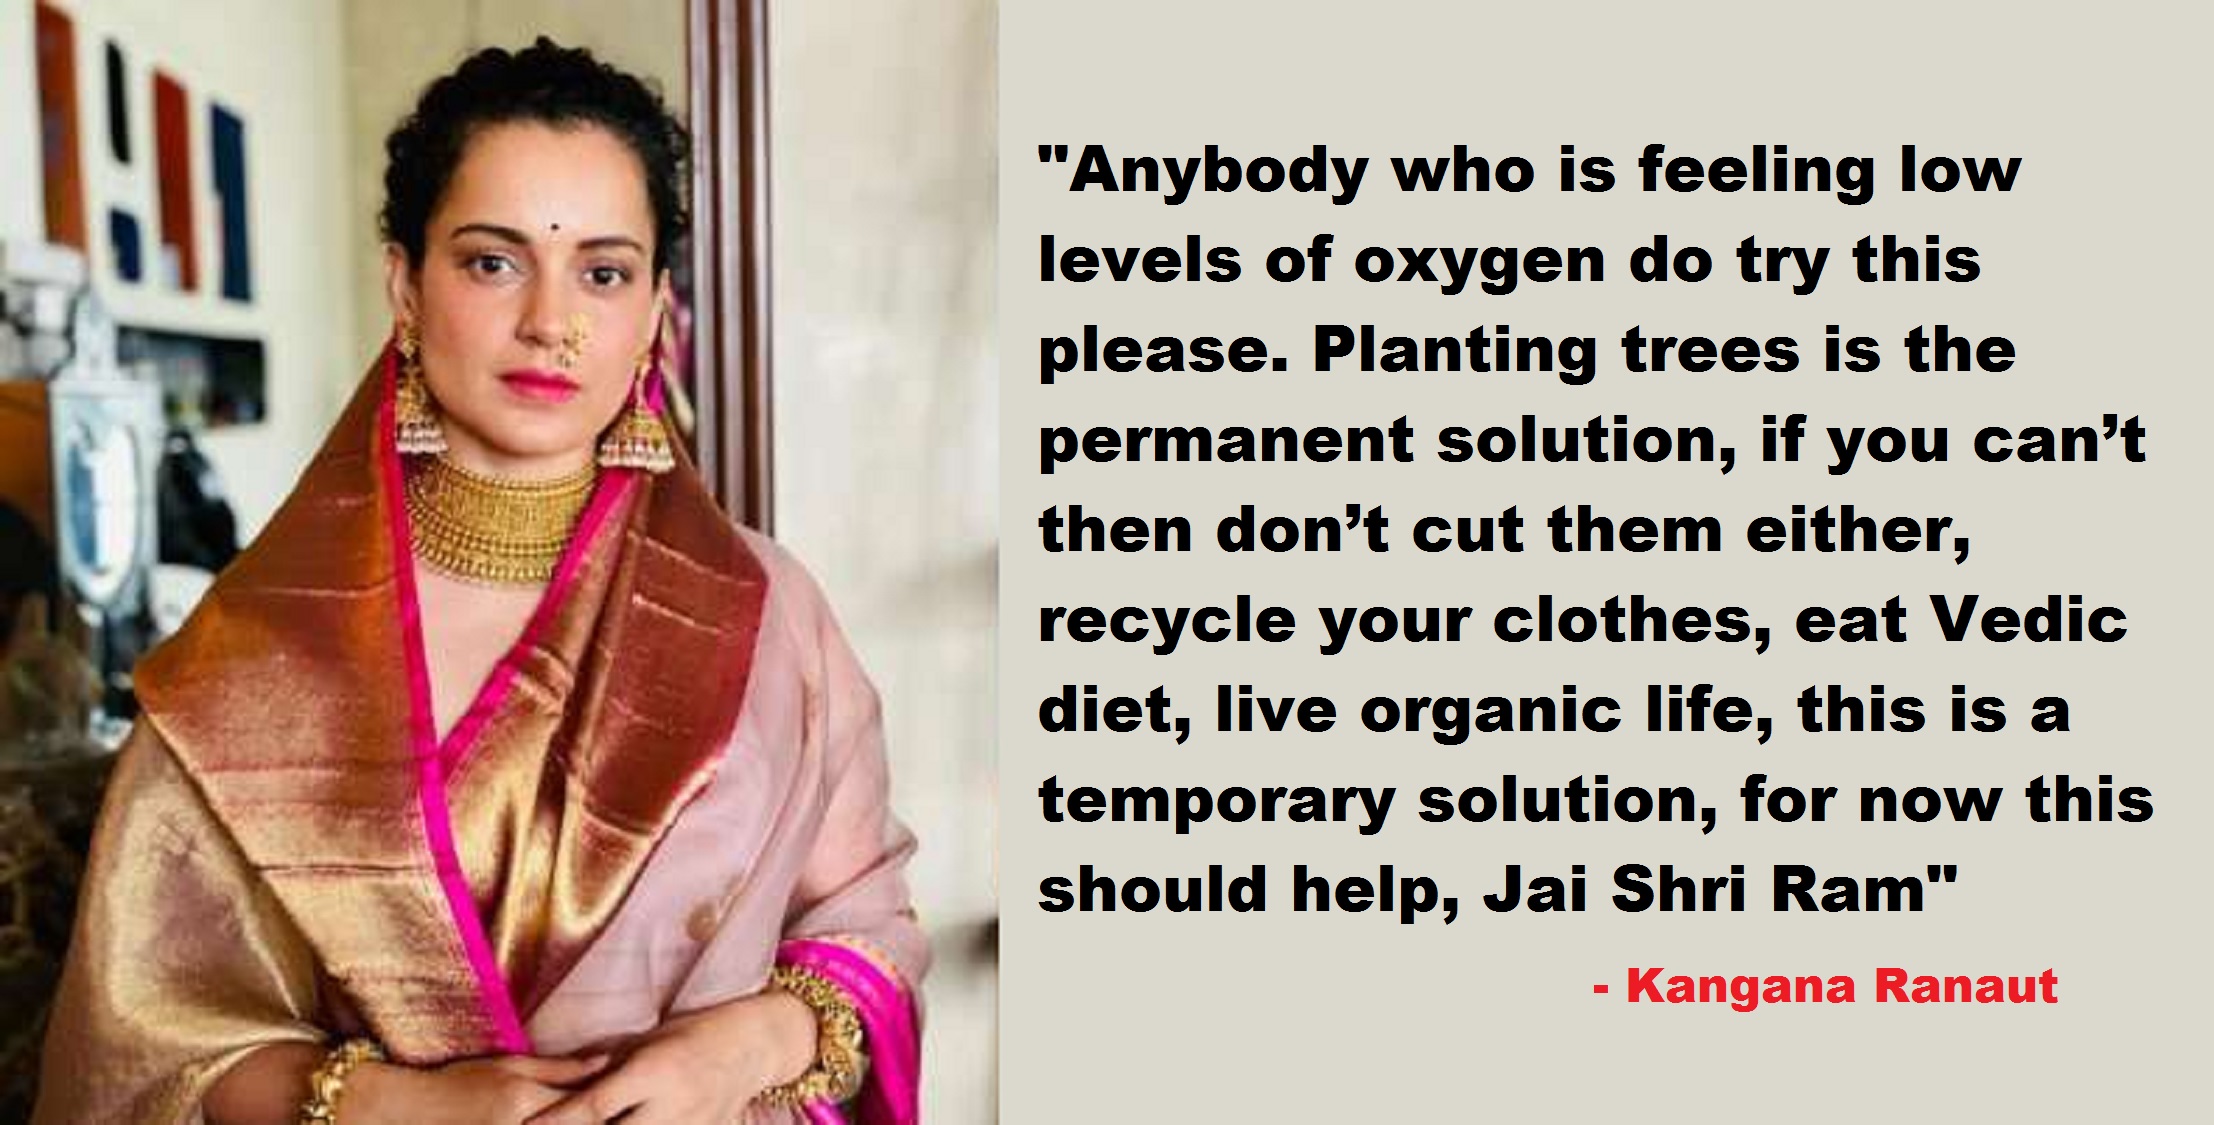 Kangana Ranaut Suggests To ‘Plant Trees’ For Low Level Of Oxygen, Blames Covid Deaths On Overpopulation